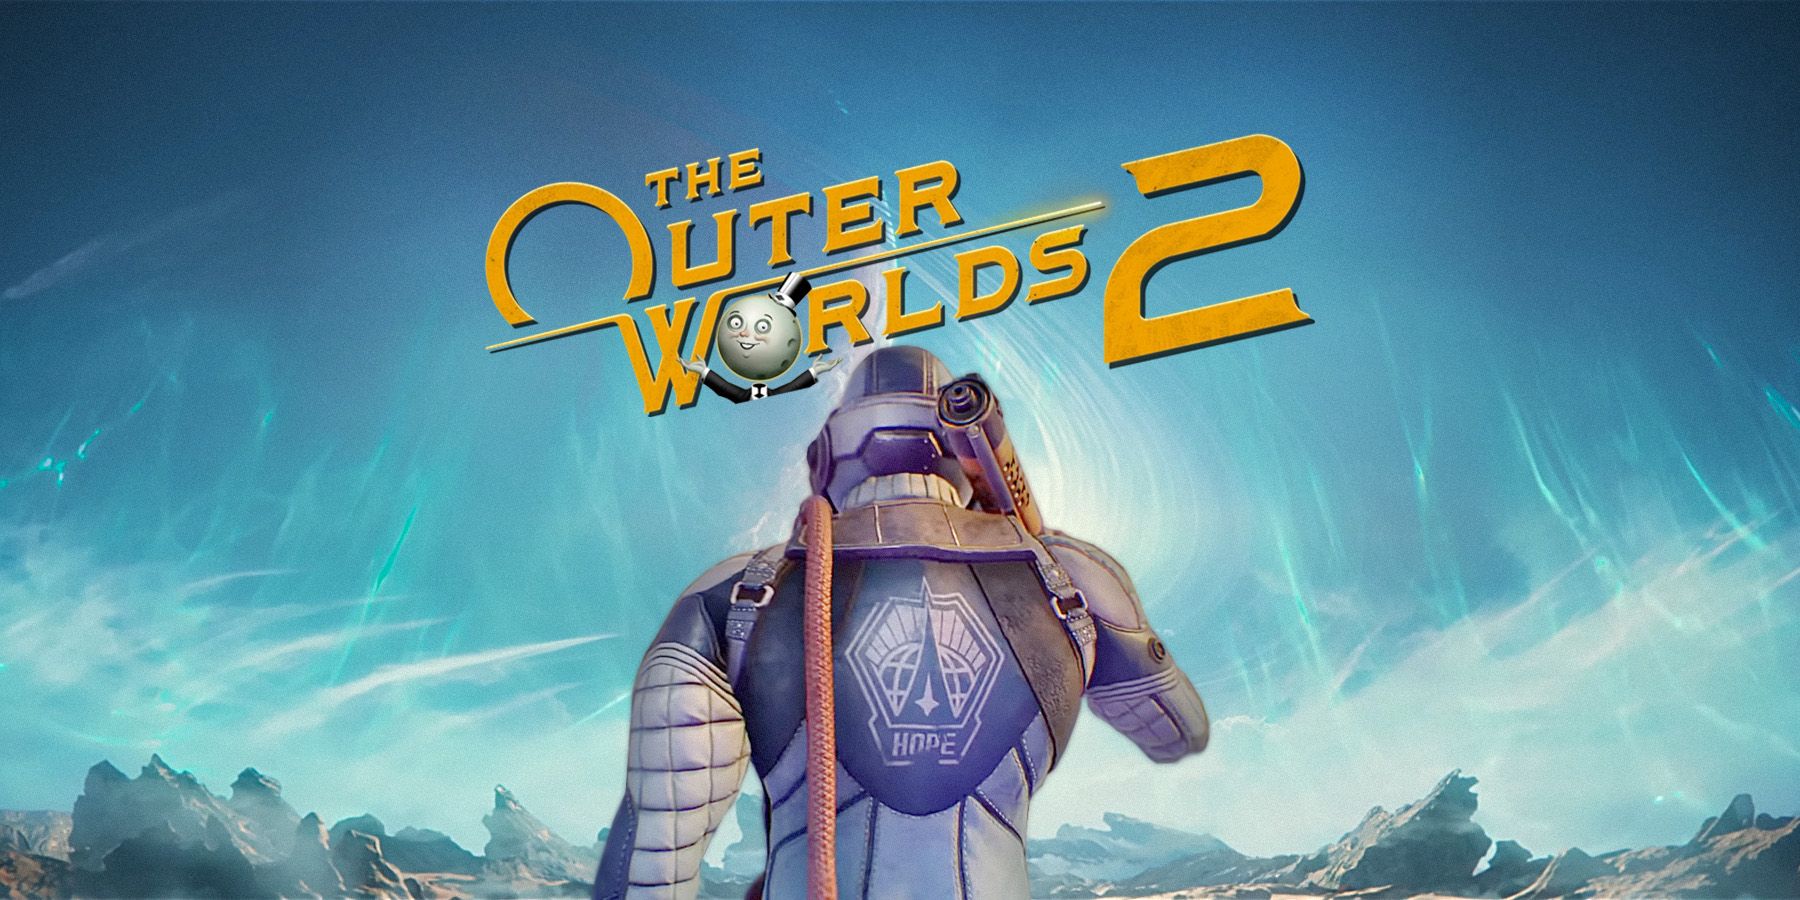 The Outer Worlds 2 New Character Systems and RPG Mechanics